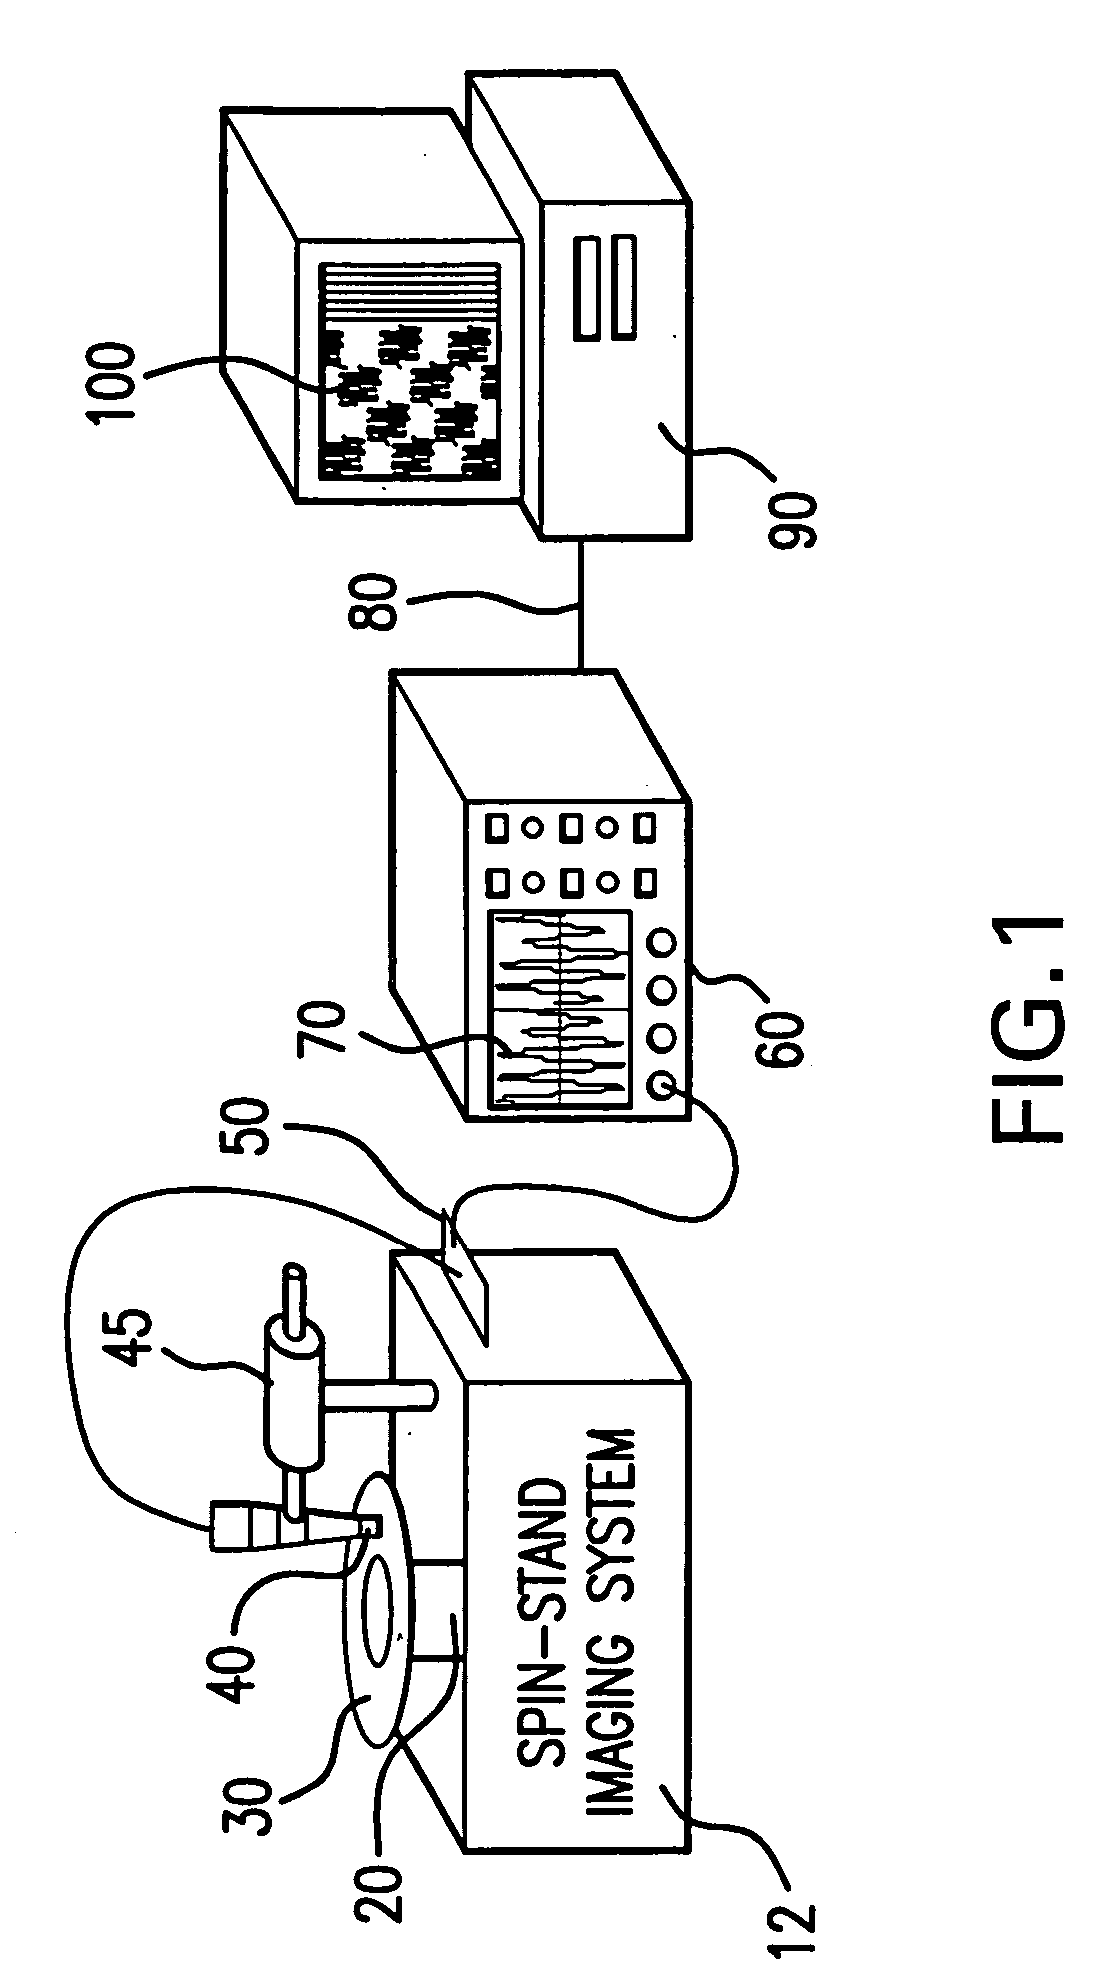 Method for intersymbol interference removal in data recovery